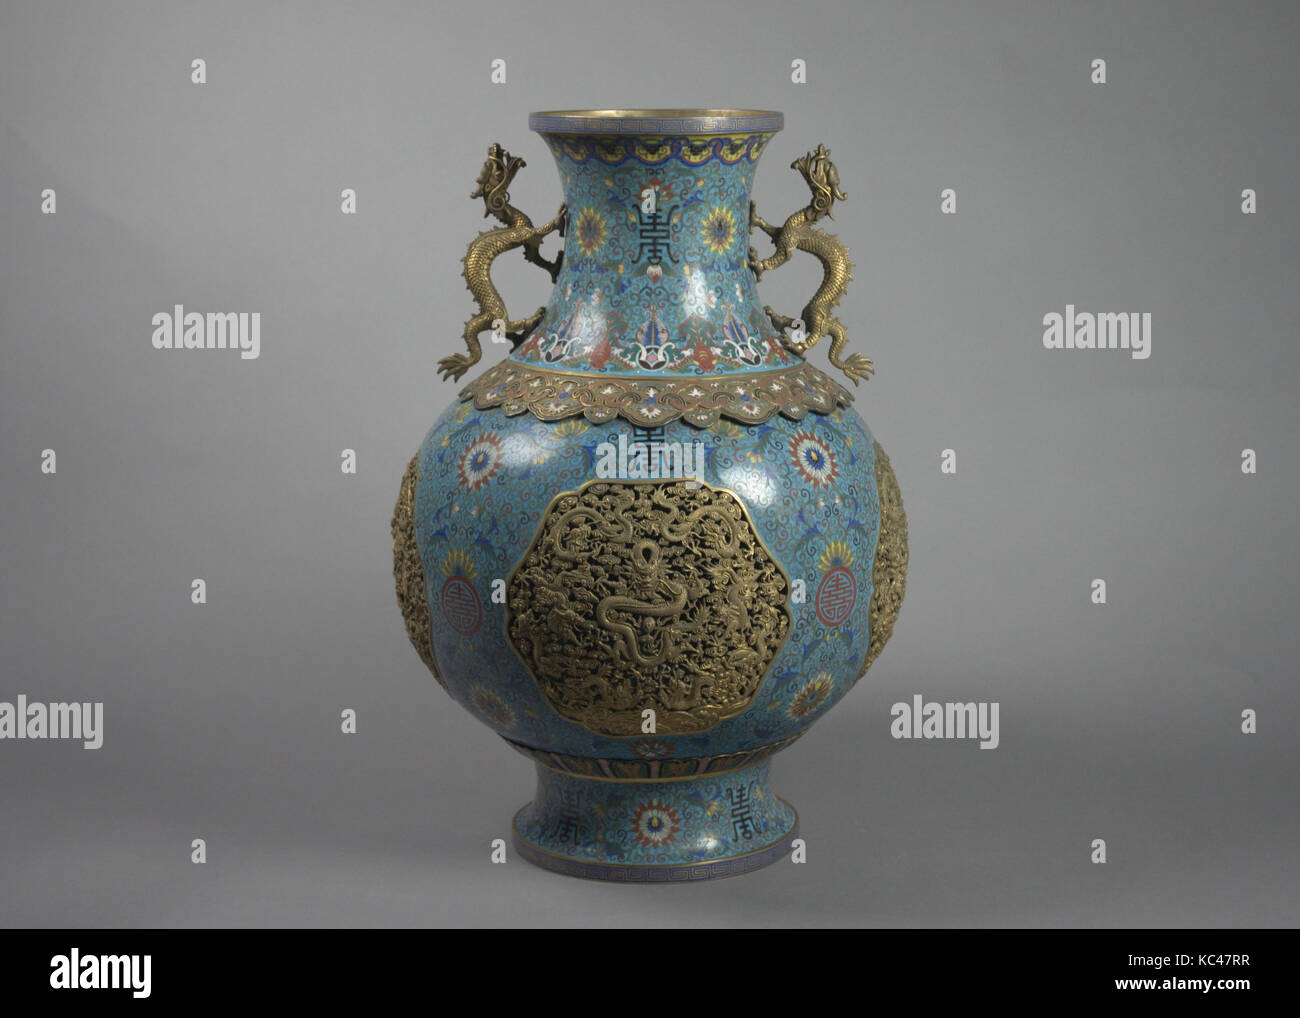 One of a Pair of Vases with Dragon Handles, 19th century Stock Photo